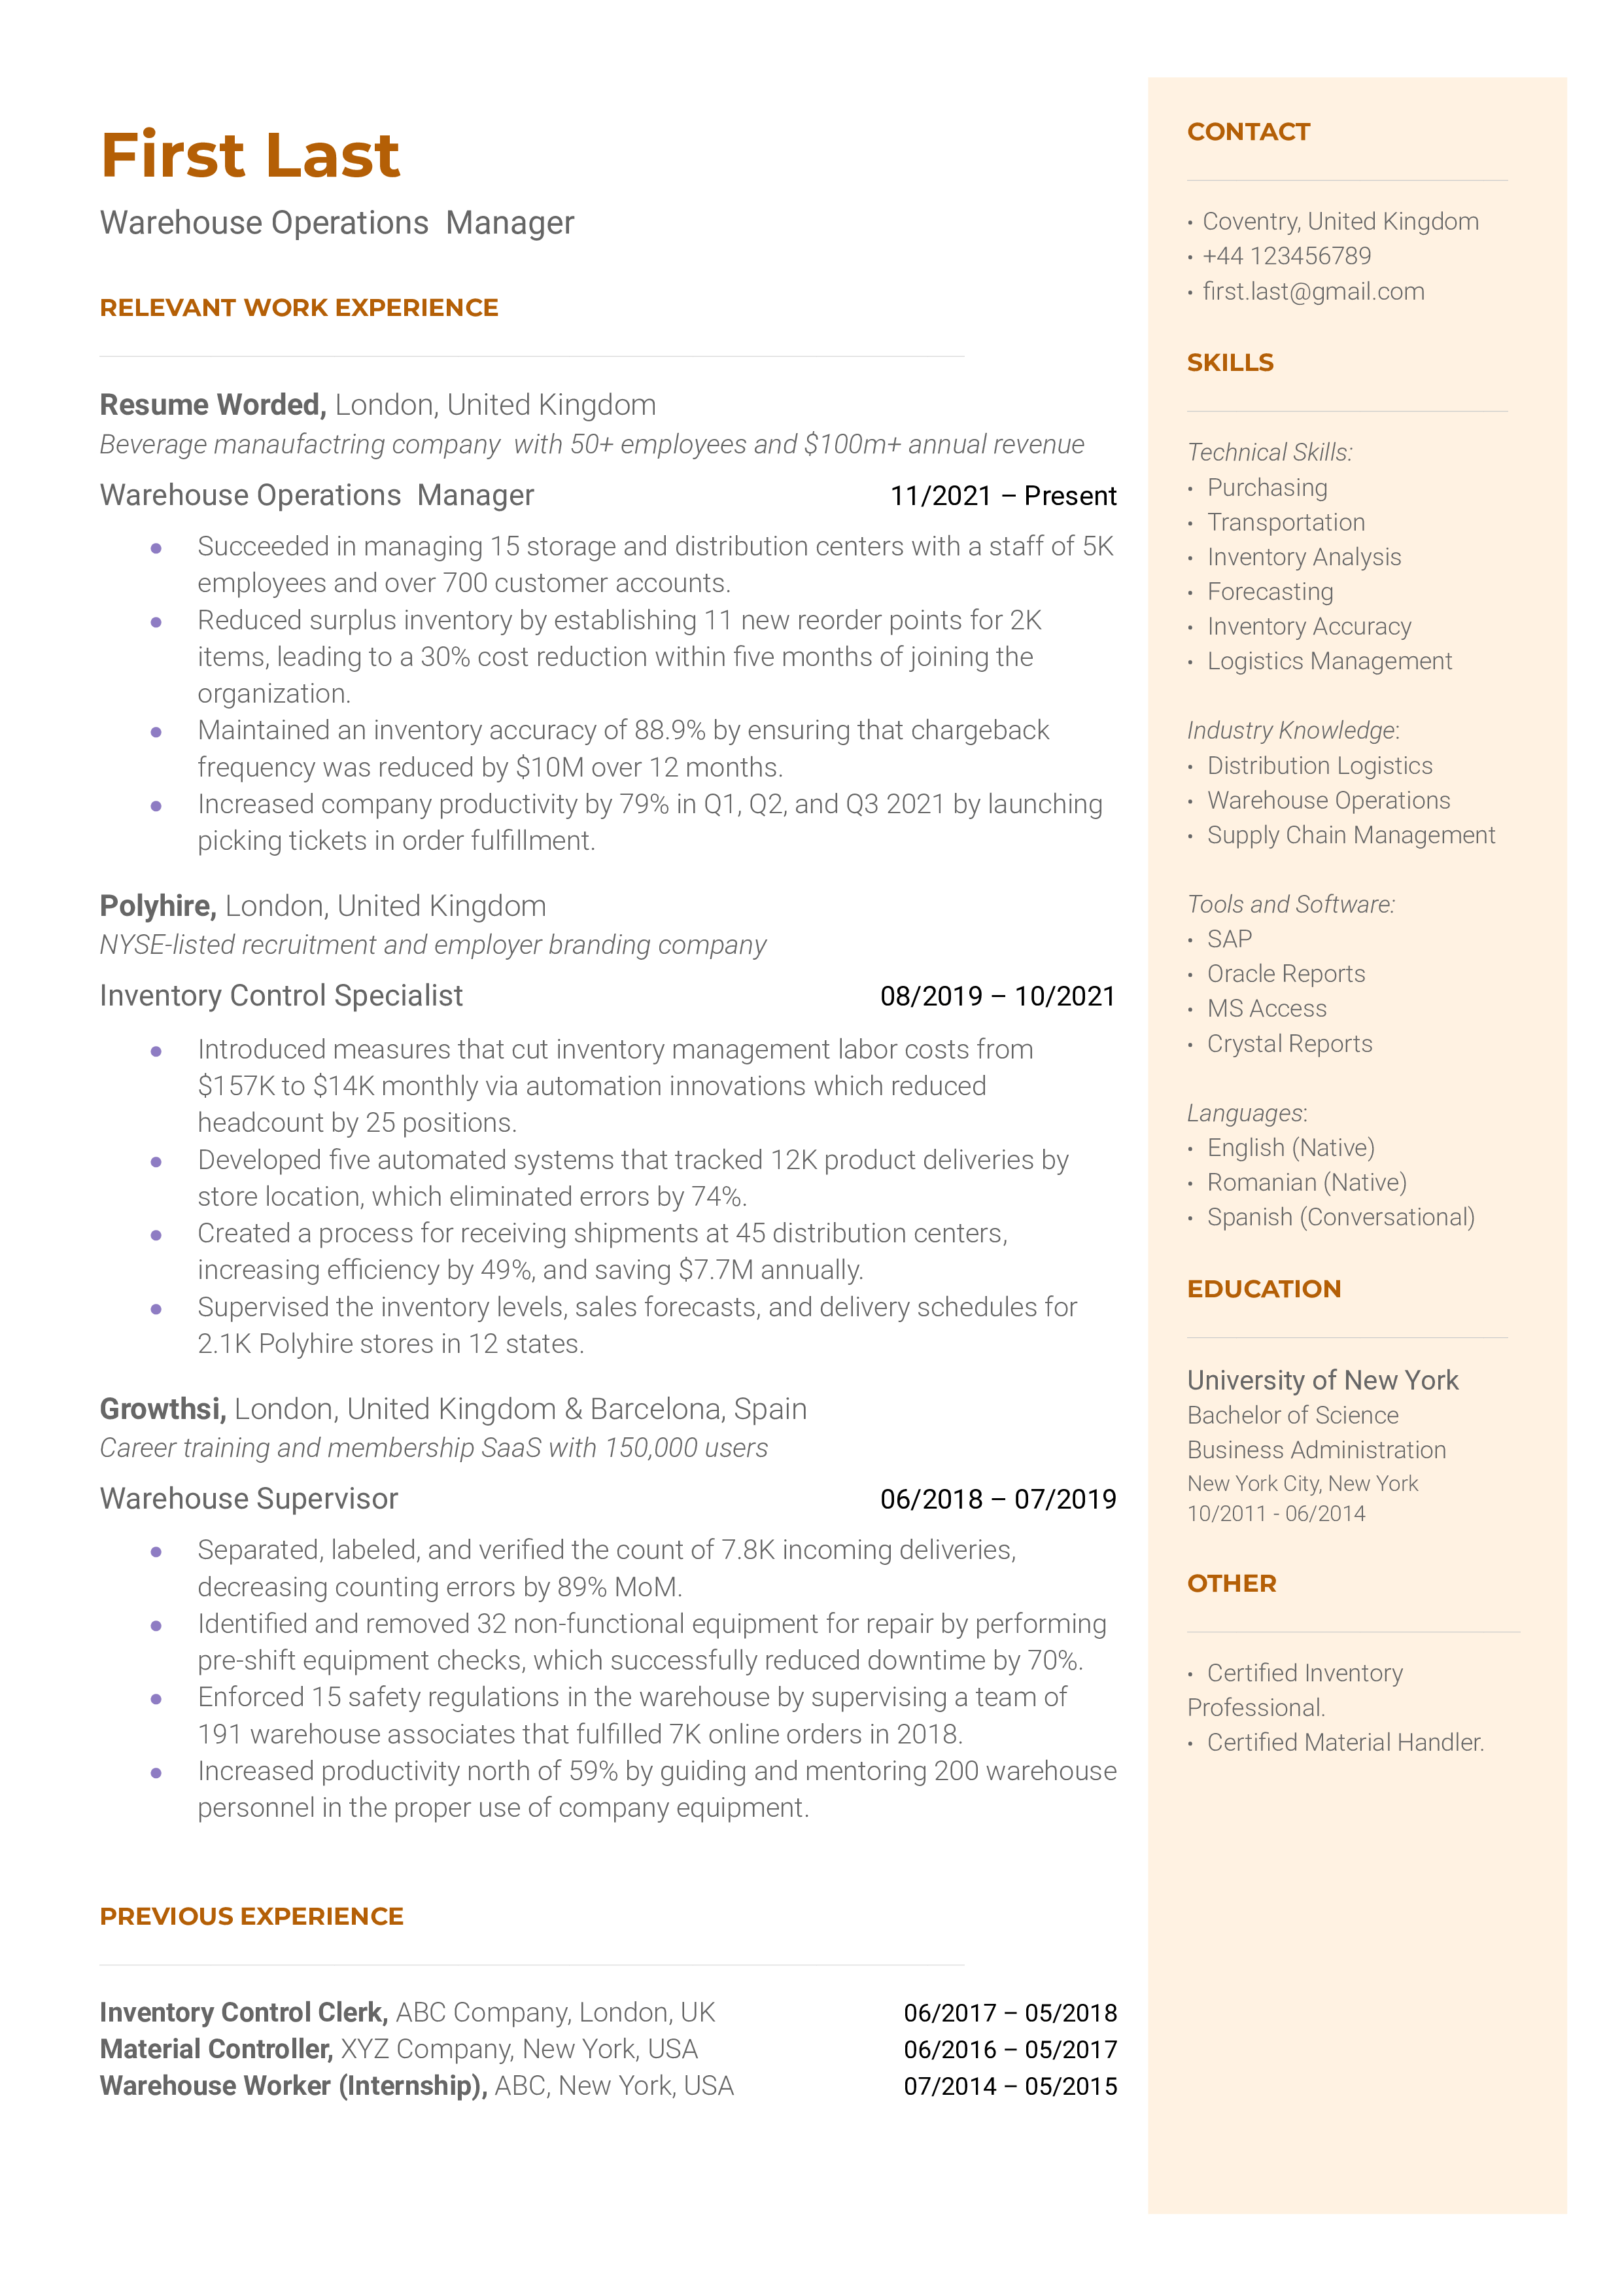 A concise warehouse operations manager CV showcasing digital skills and safety experience.